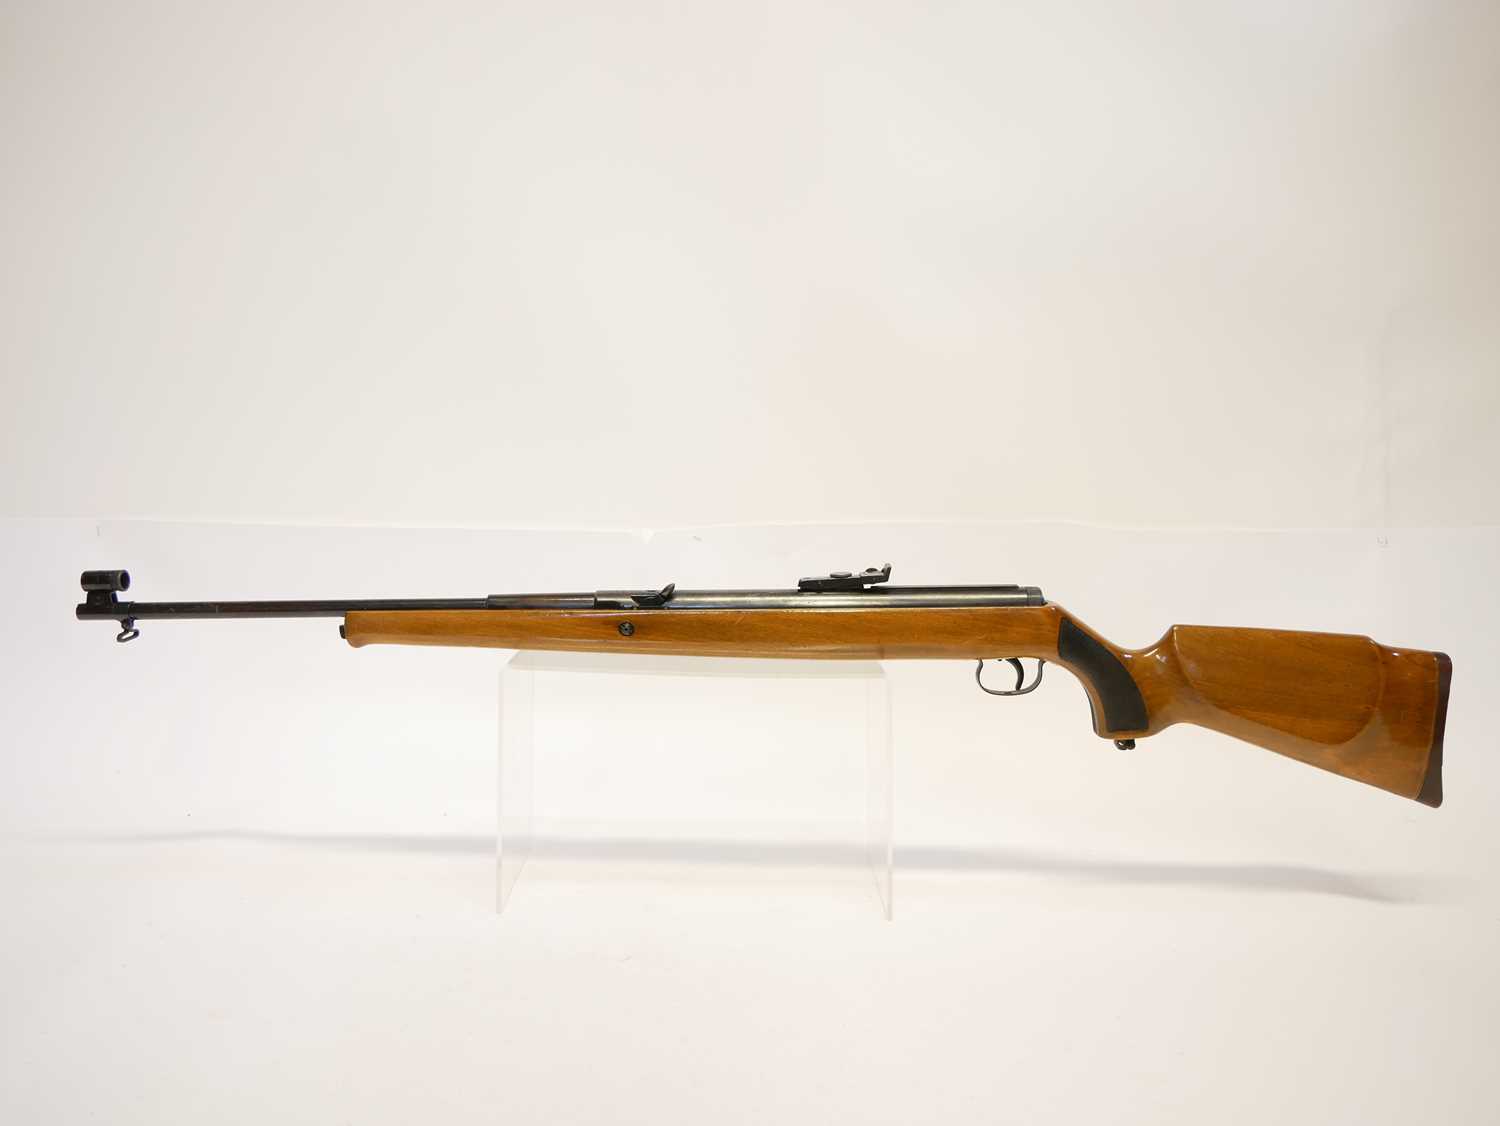 Original model 50 .22 air rifle, serial number 71371623, 18.5 inch barrel with tunnel front sight - Image 13 of 13